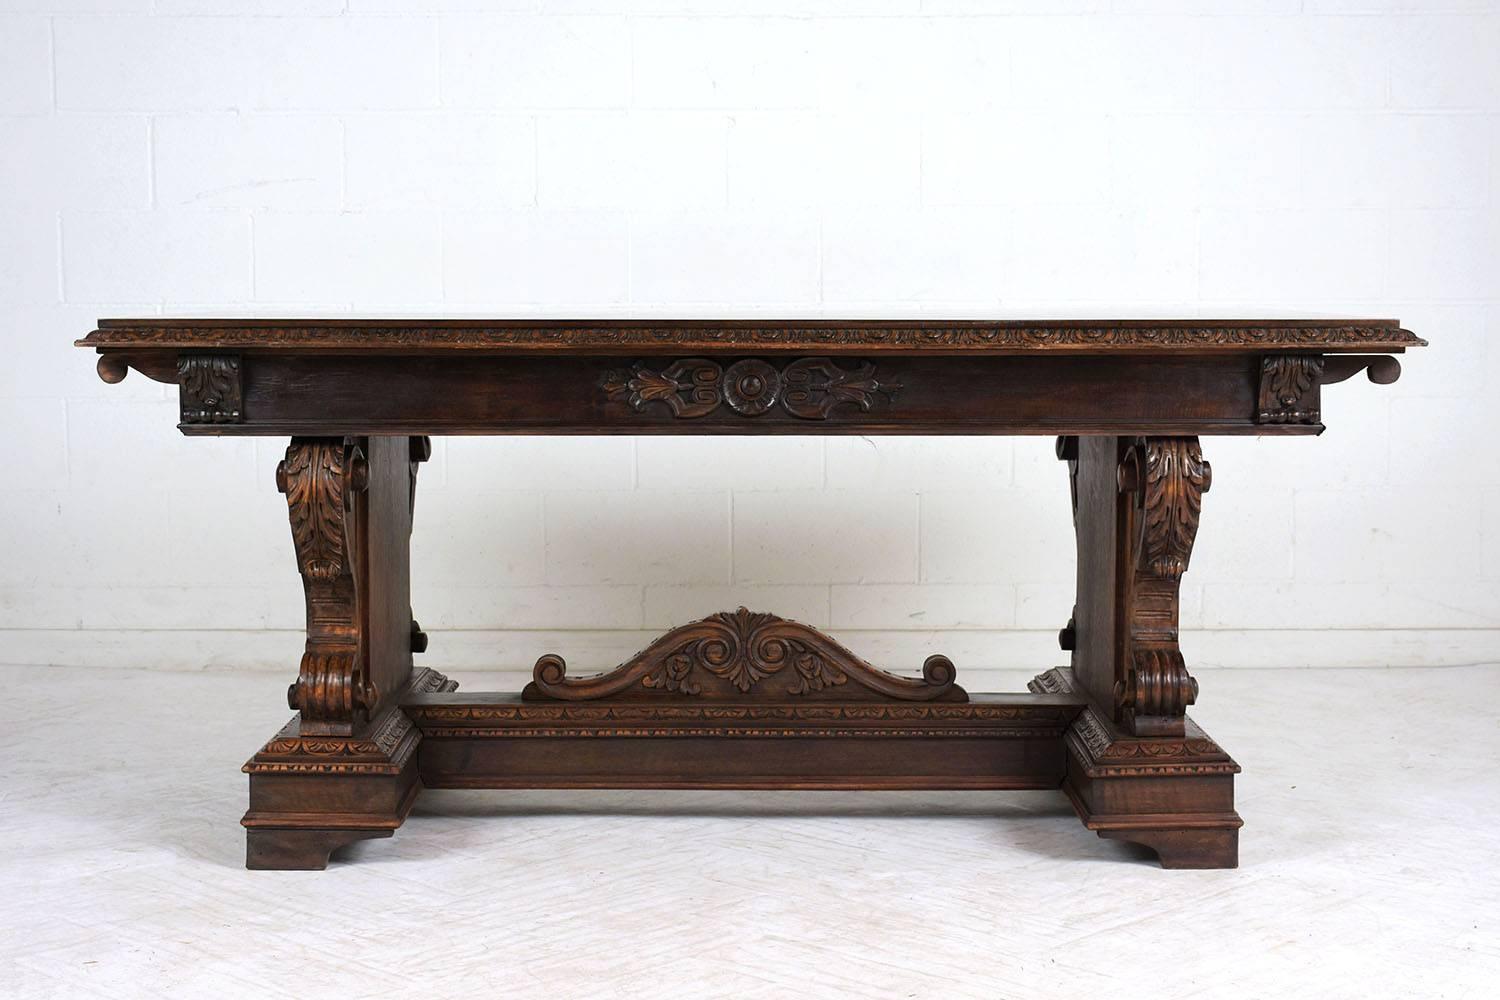 This heavily carved Italian Renaissance-style trestle dining table dates to the early 1900s. The table is made of walnut wood stained a rich walnut color with a polished finish. The table is adorned with carved details of acanthus leaves, scrolls,